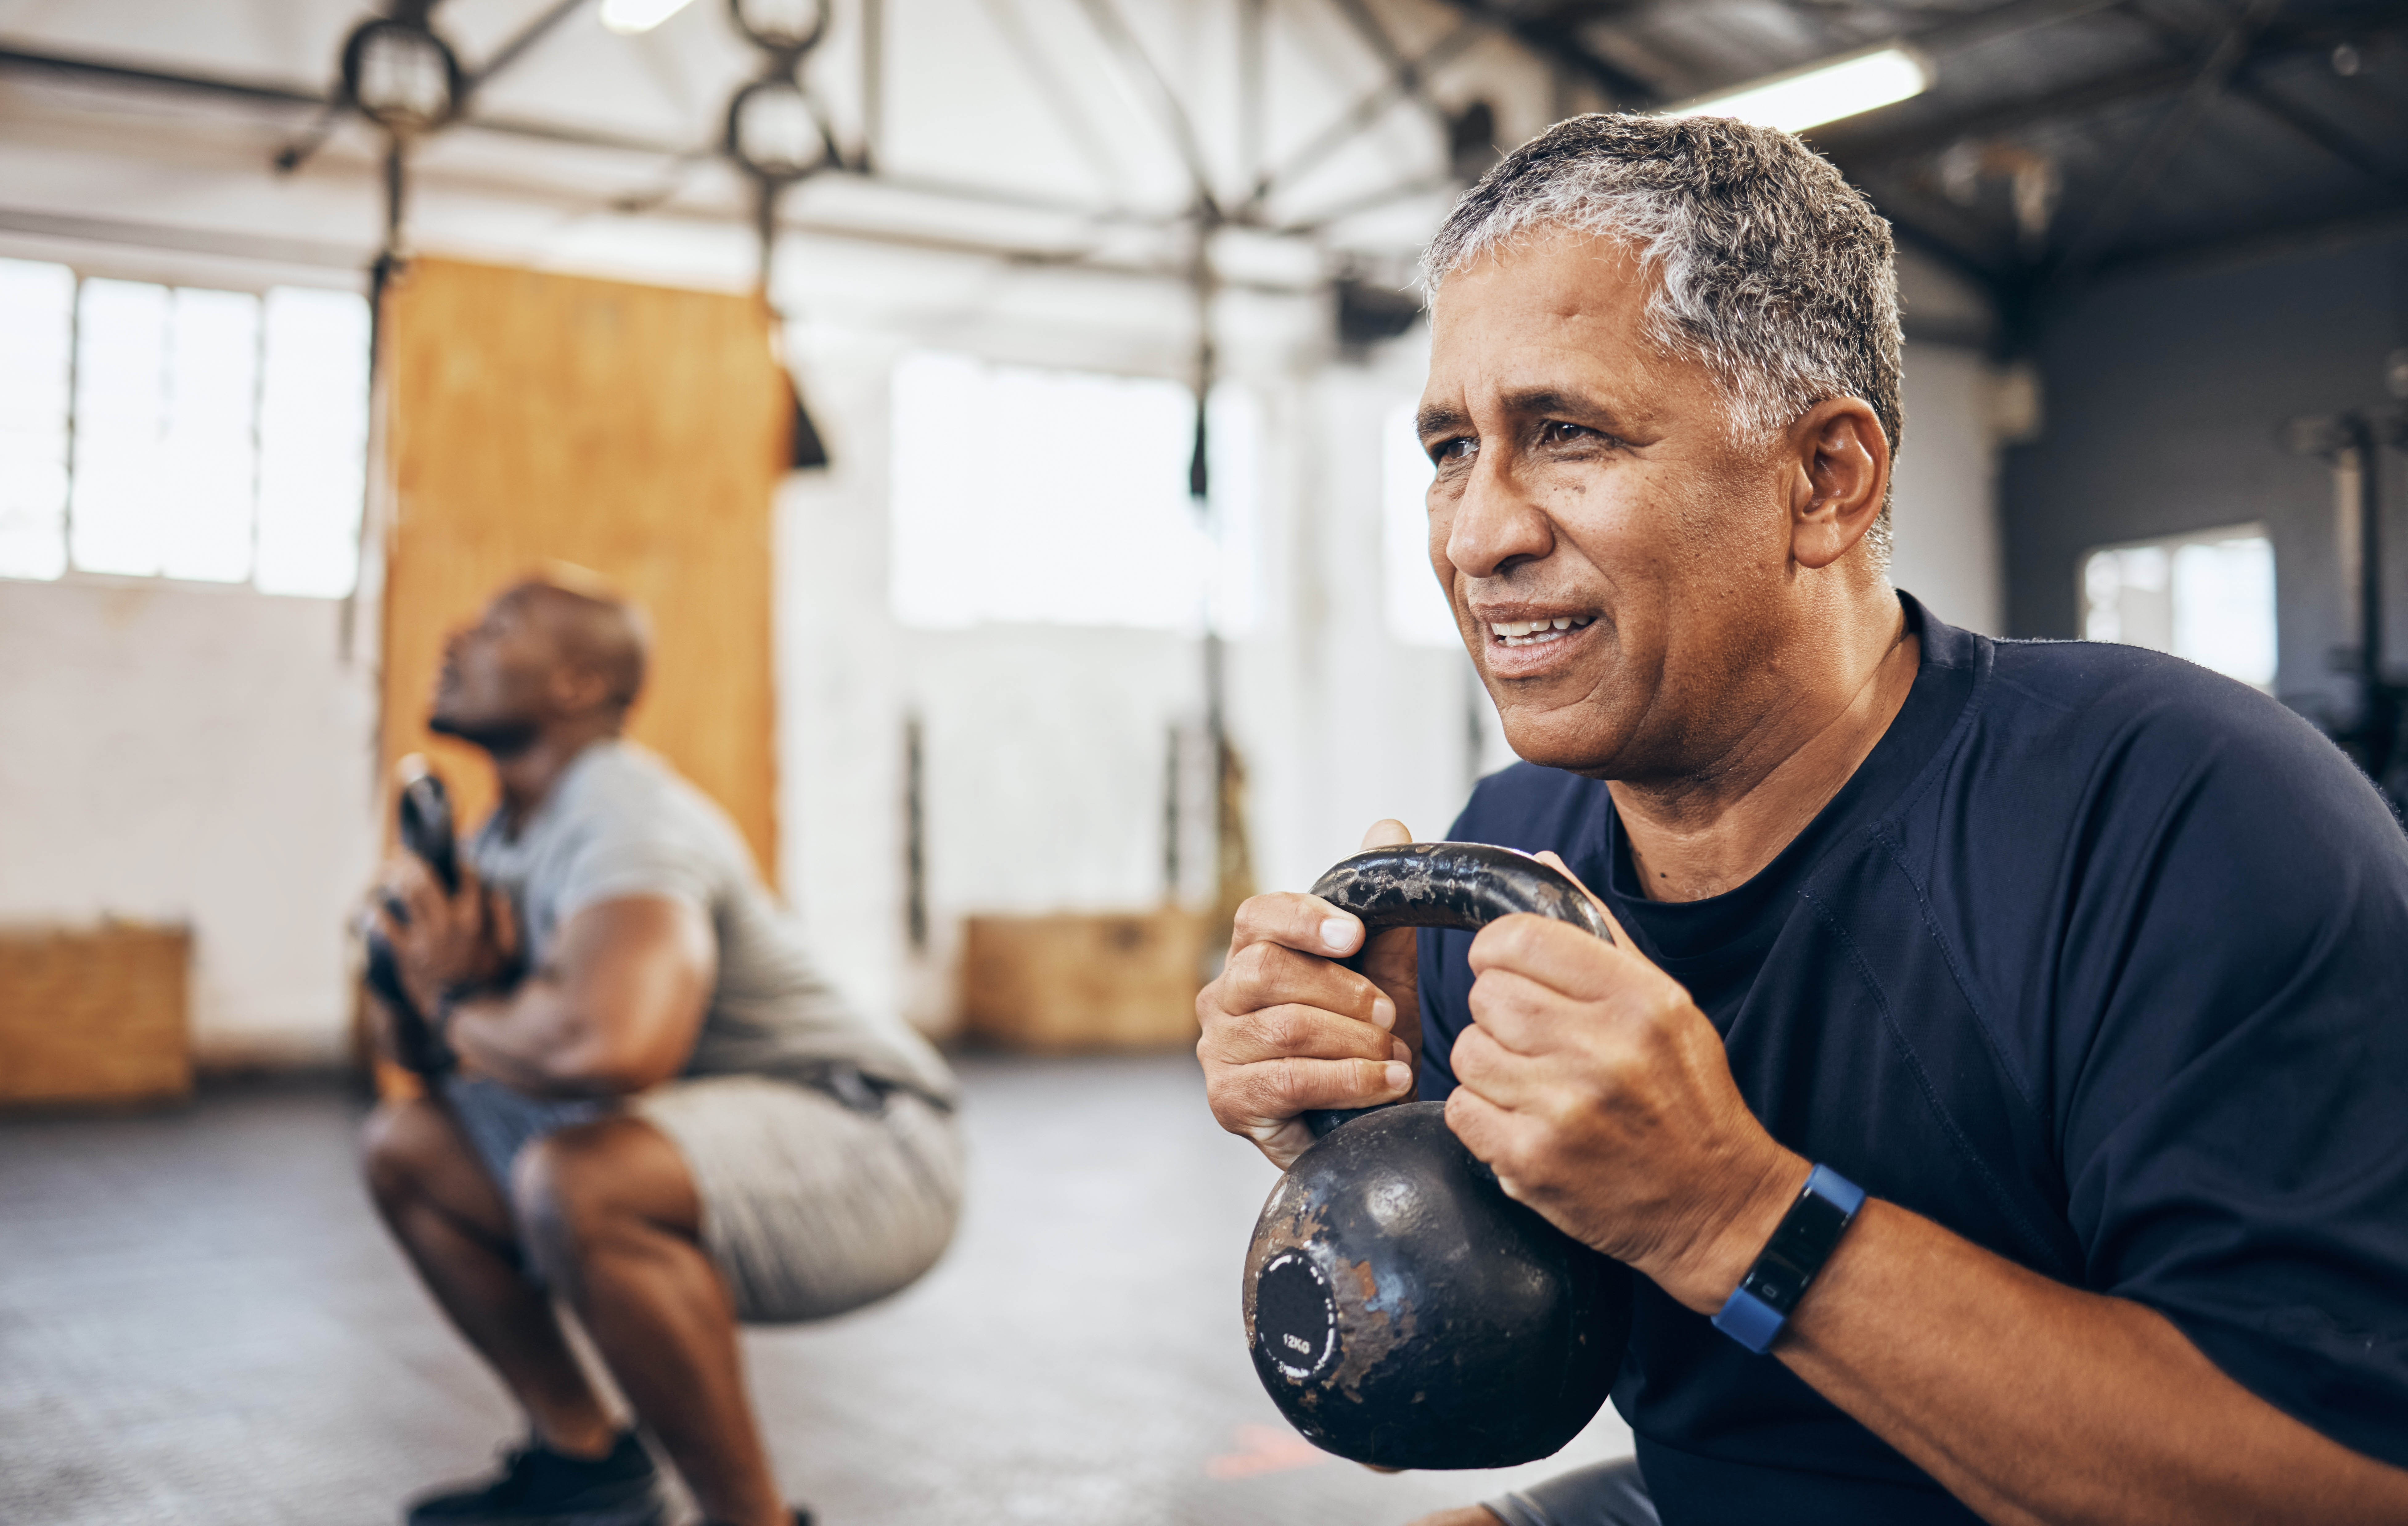 Middle aged man lifting a kettlebell as part of a workout group fitness class in a gym